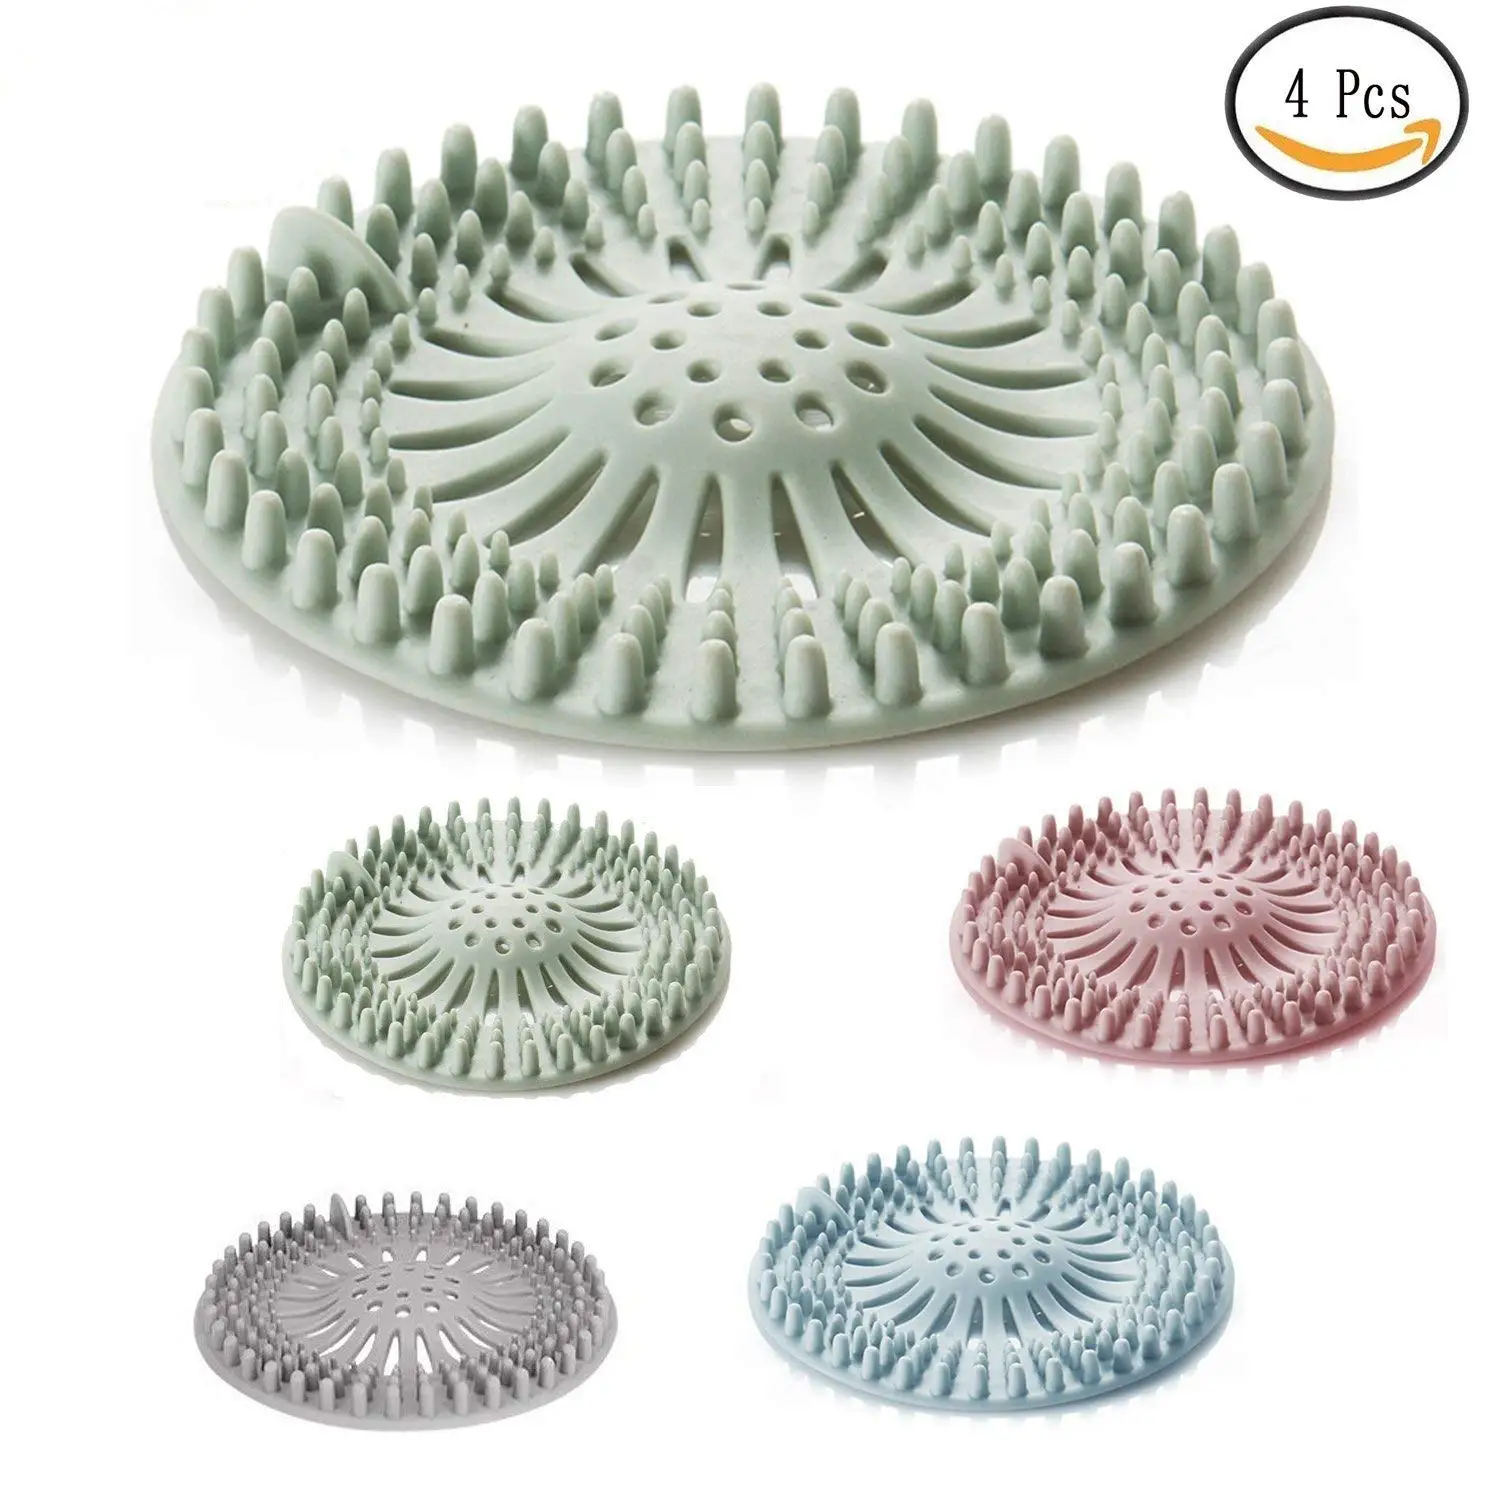 WEYNG Silicone Floor Drain Stopper Plug Shower Bath Tub Cover Rubber Strainers Protectors Prevent Odors for Bathtub Kitchen Bathroom Floor Laundry